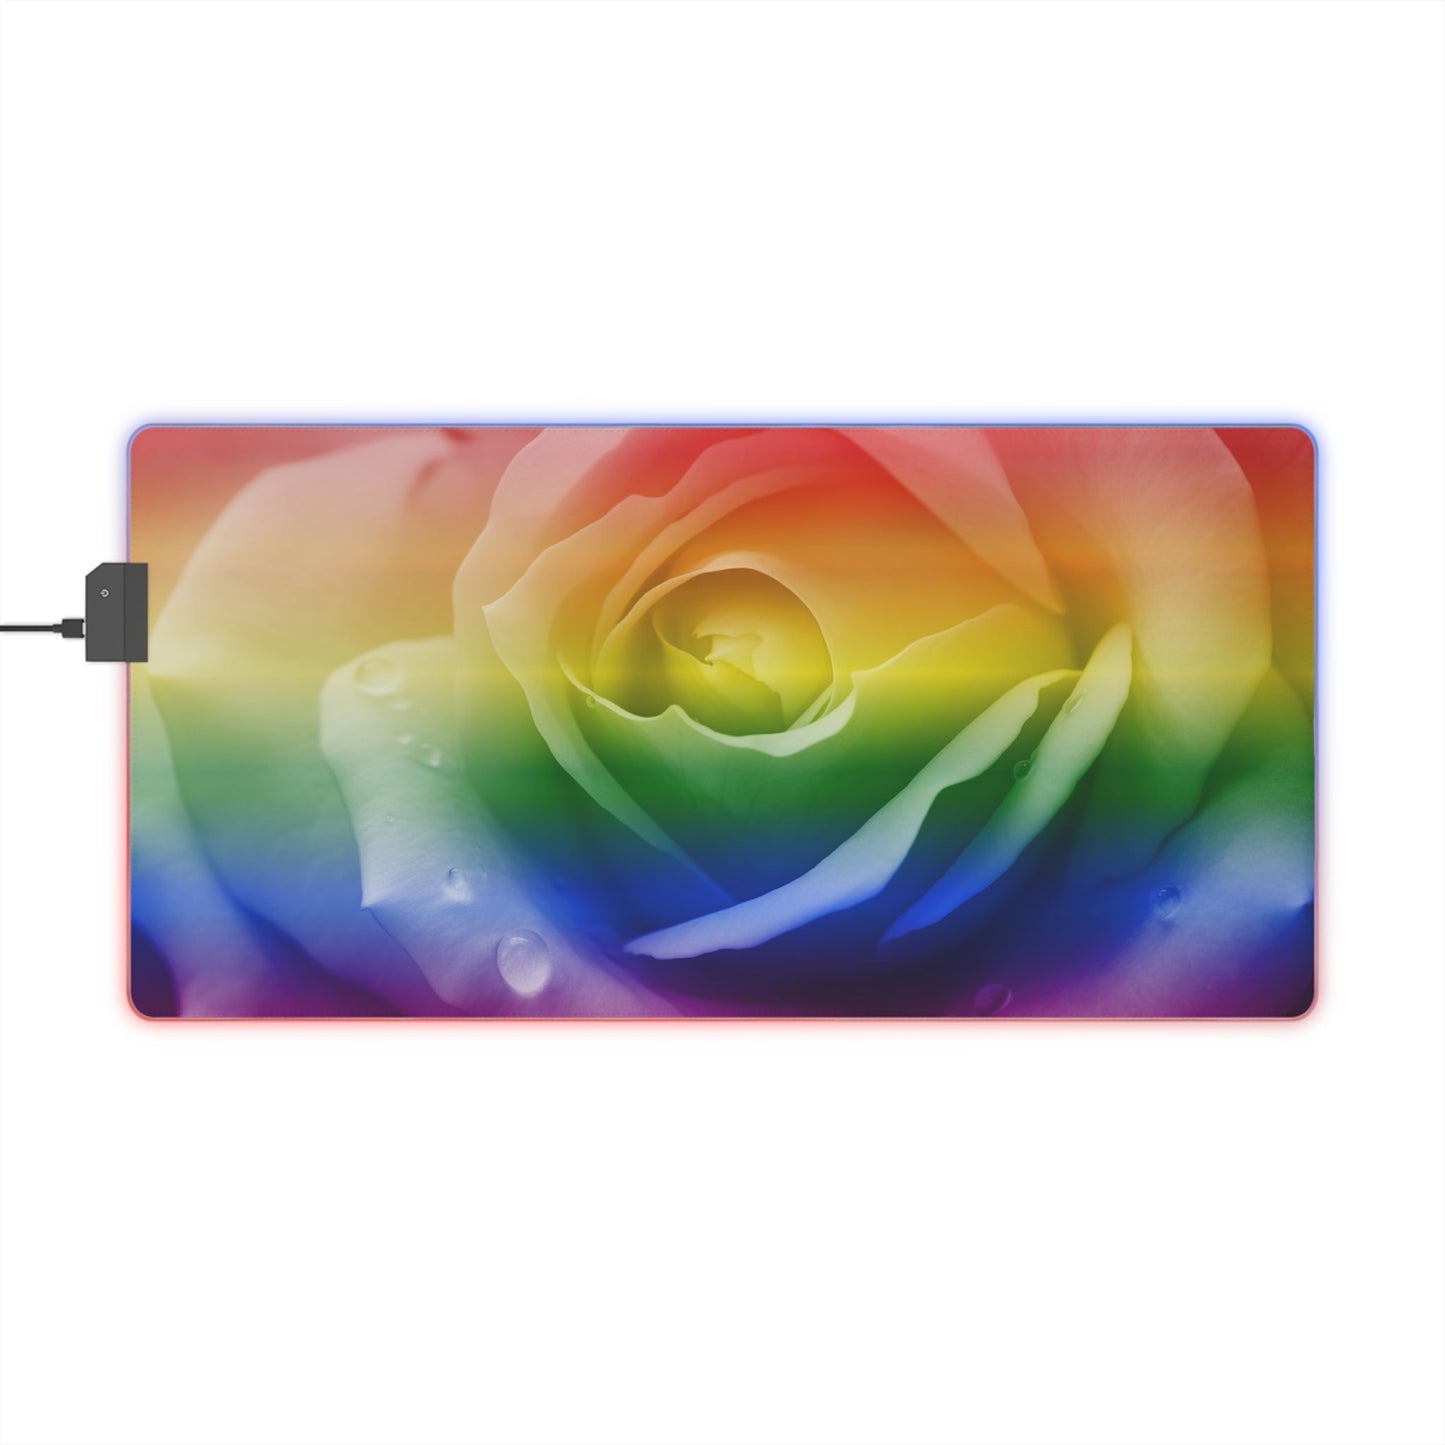 23.6 x 11.8 / Rectangle 8 Proud Rose LED Gaming Mouse Pad